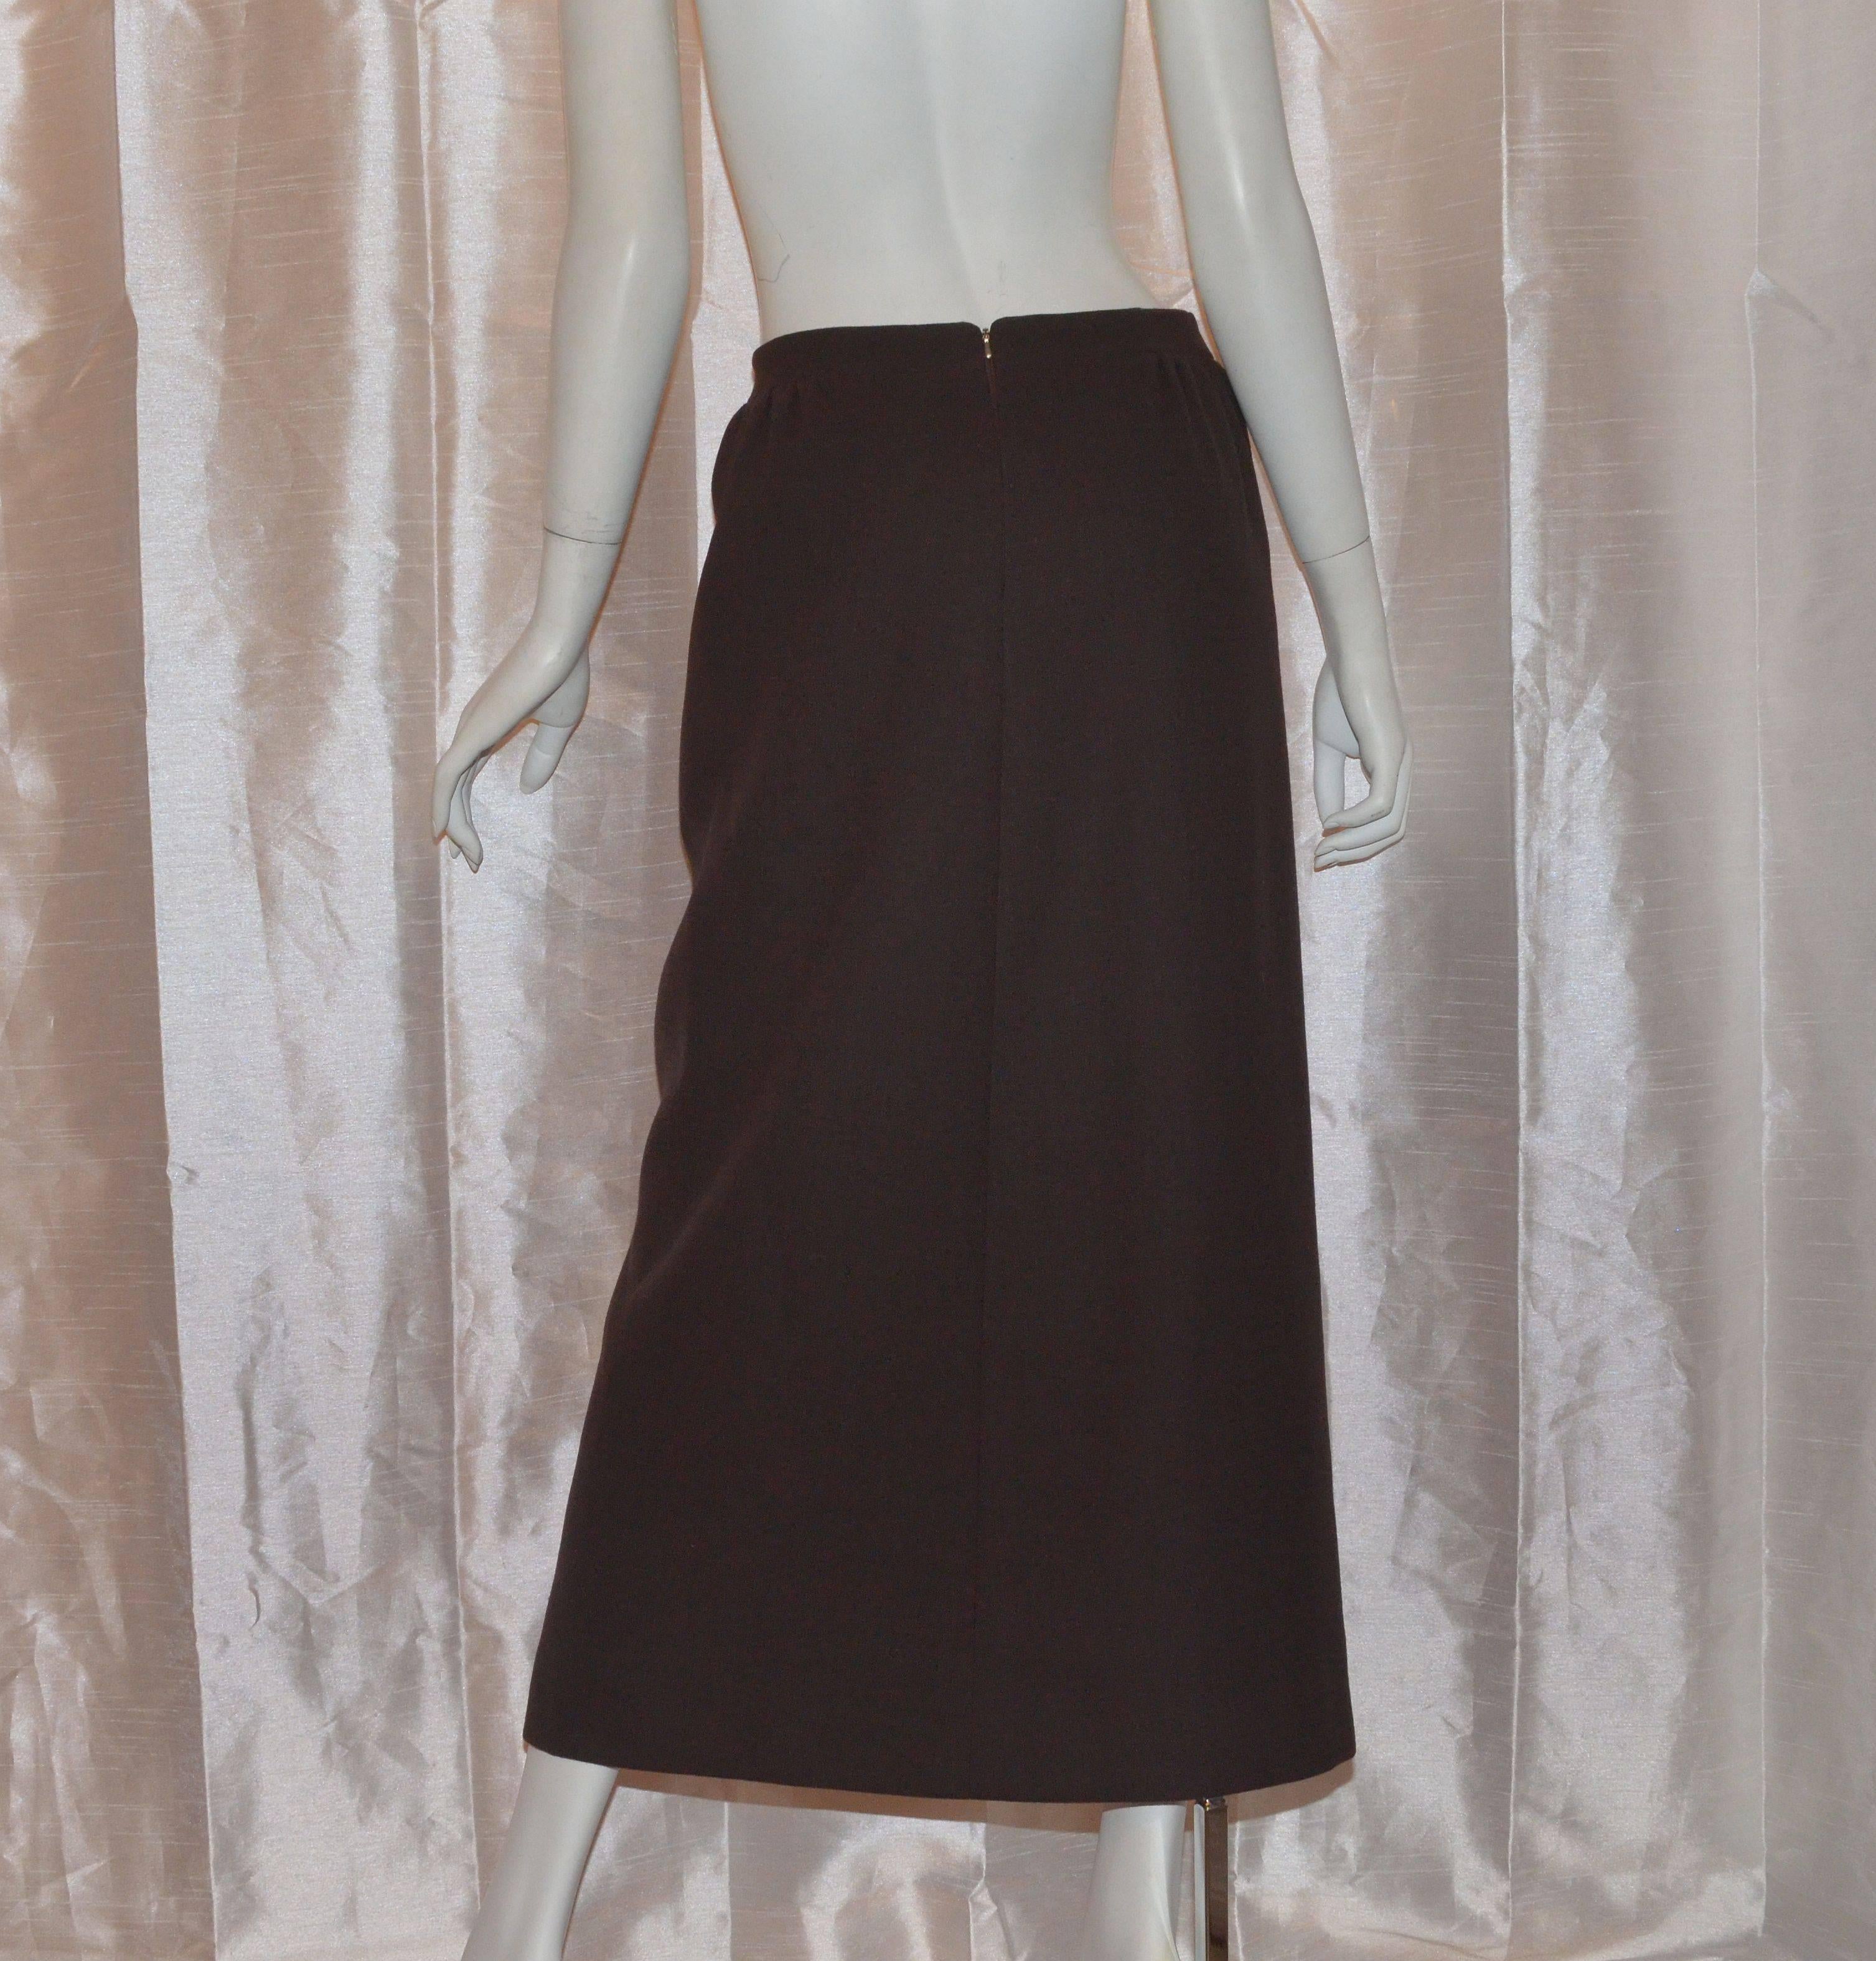 Pierre Cardin 1970's maxi skirt has color block mod pattern in neutrals and browns on the front and is made of structured wool. Closes with a back zipper and is fully lined.

Measurements:
Waist - 28''
Hips - 37.5''
Length - 36''